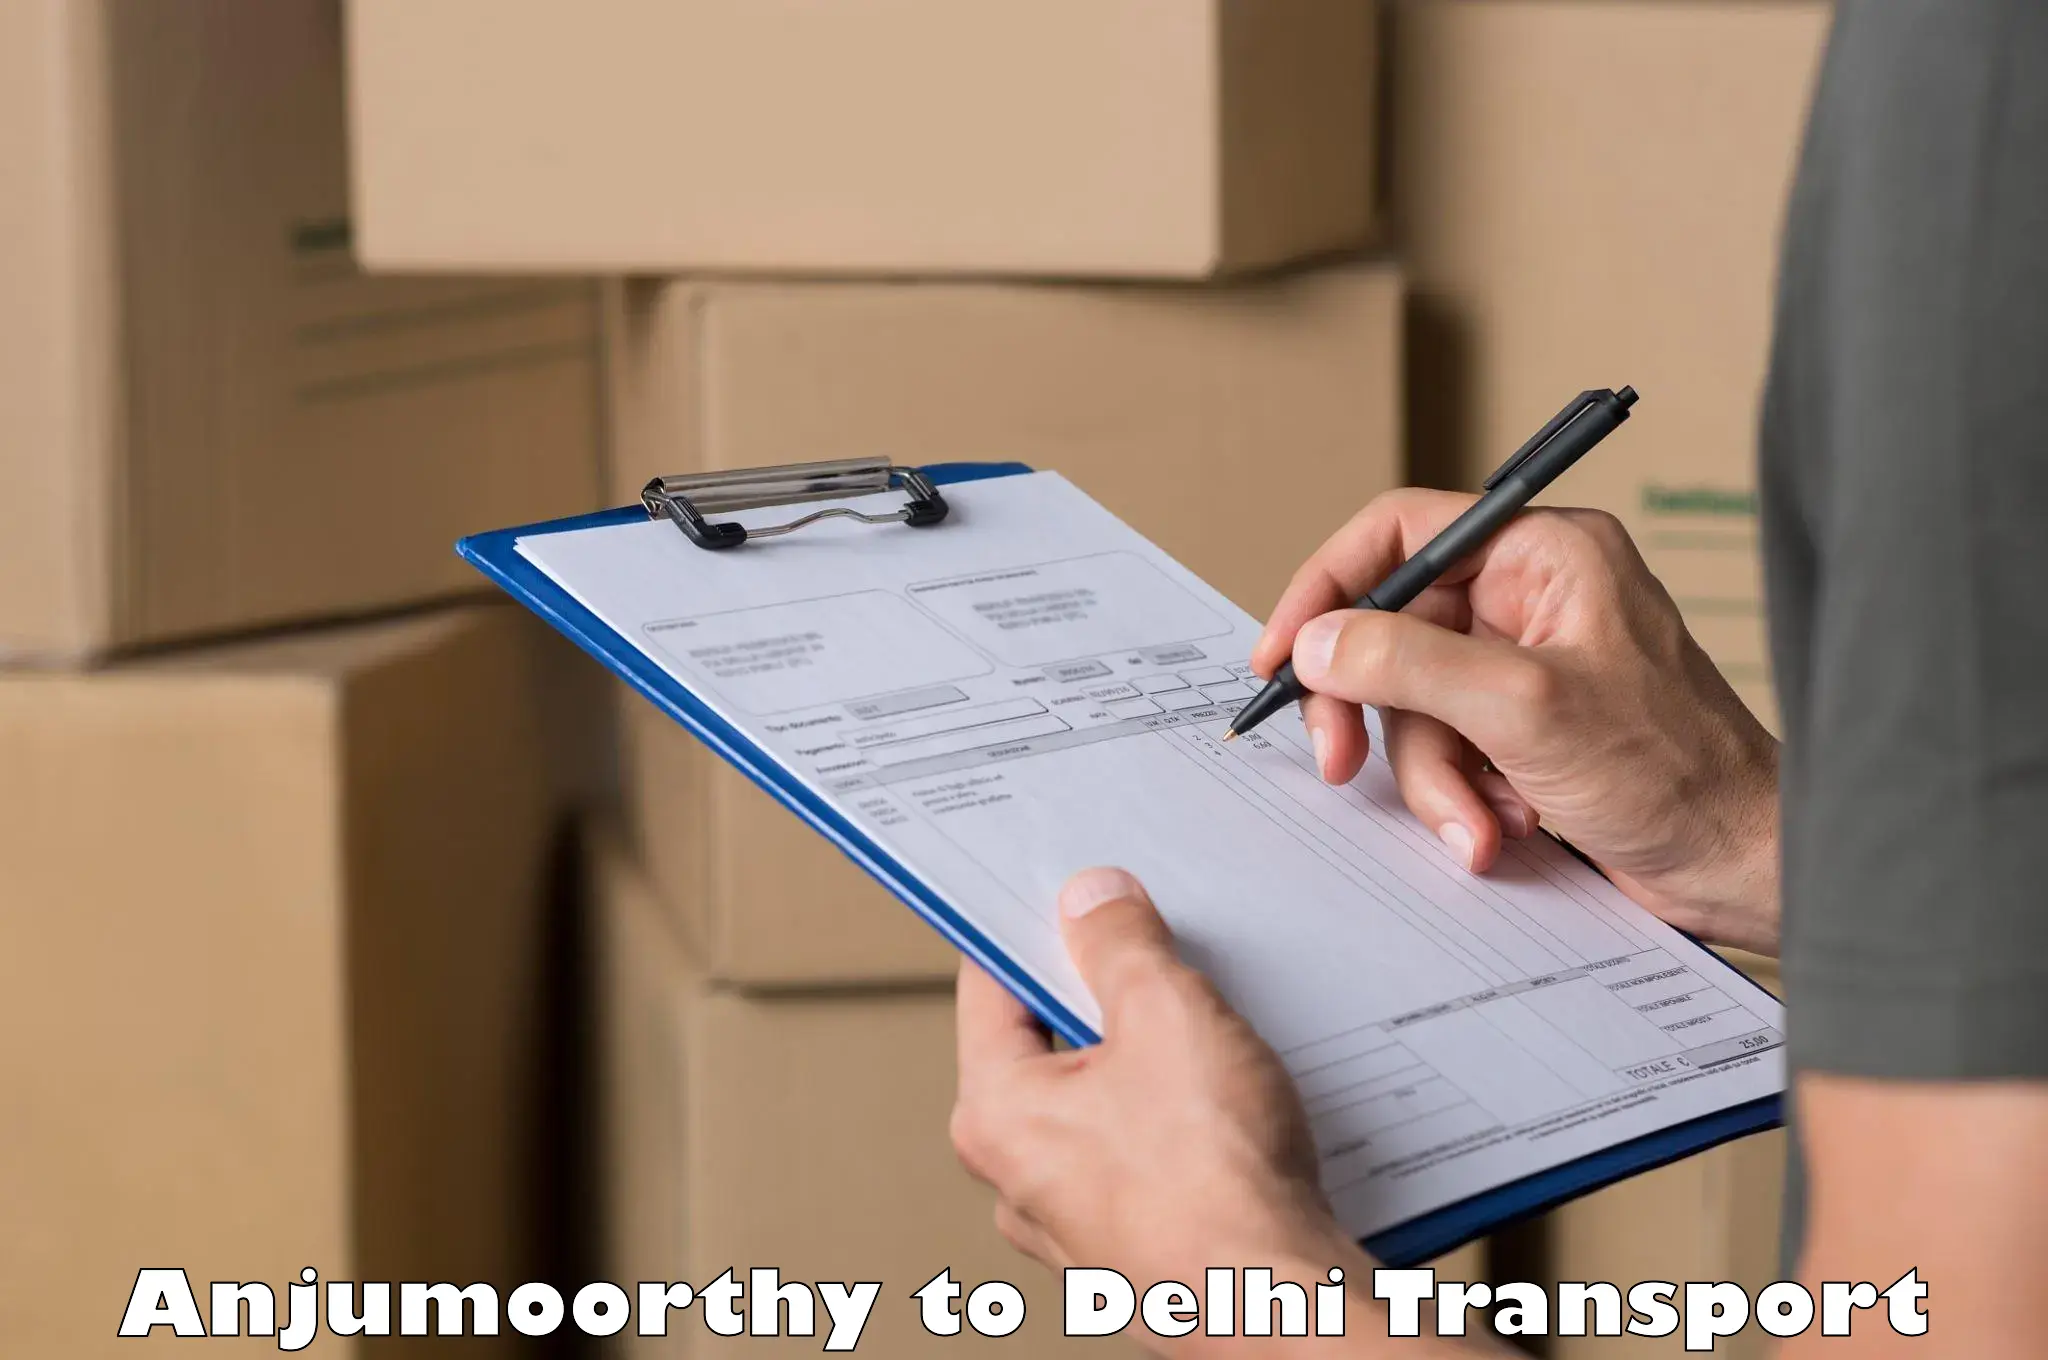 Container transport service Anjumoorthy to East Delhi